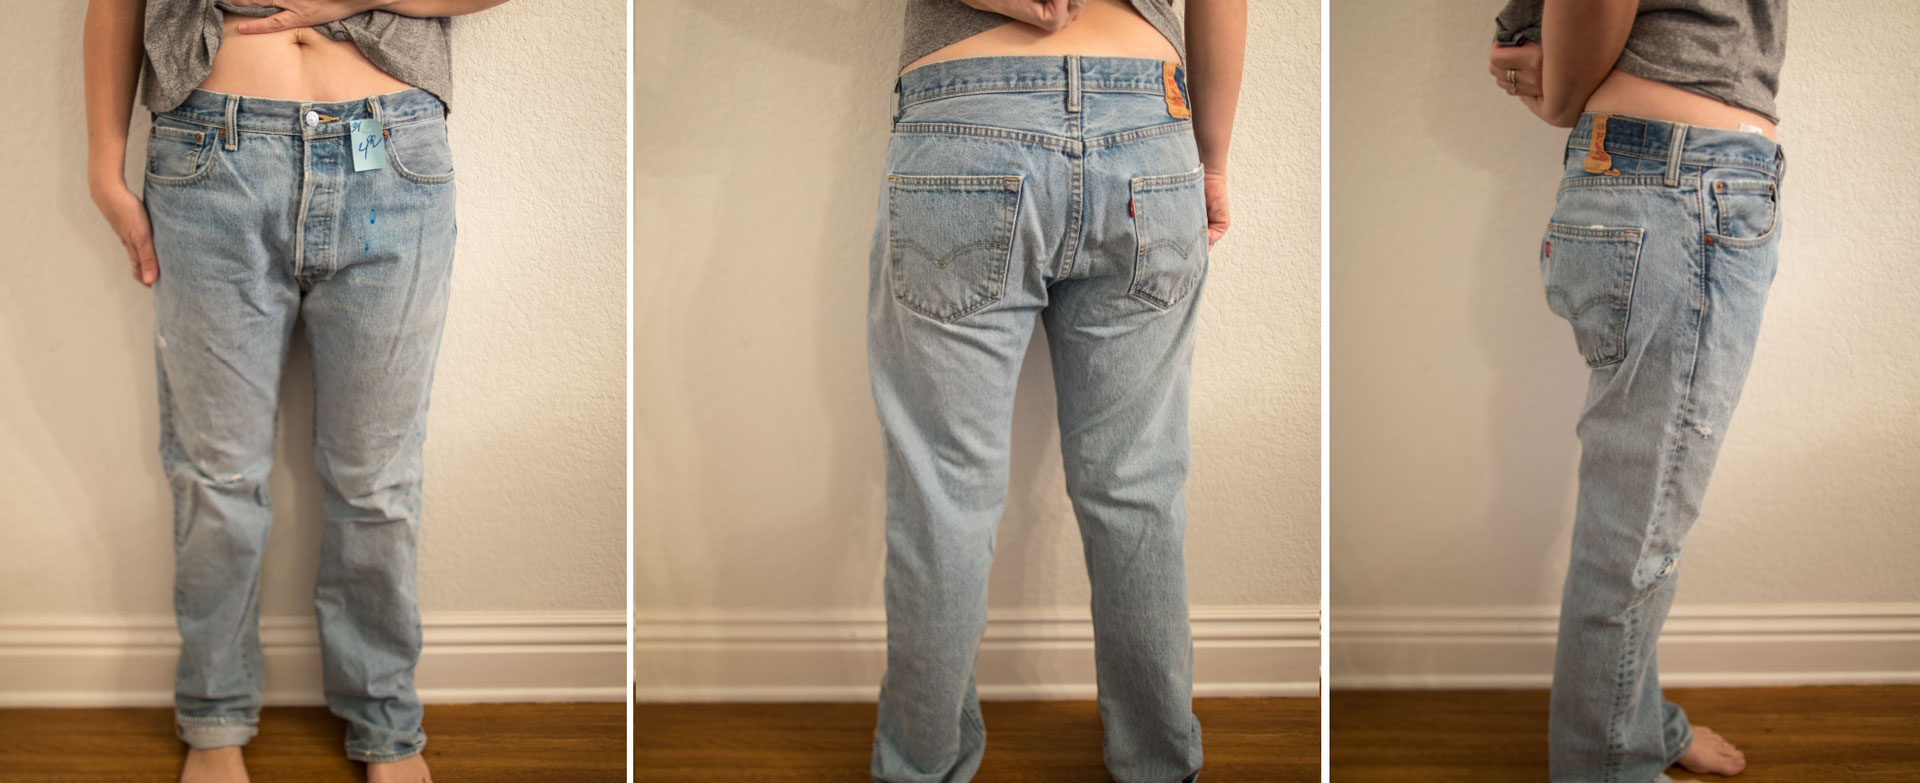 do levis fit small